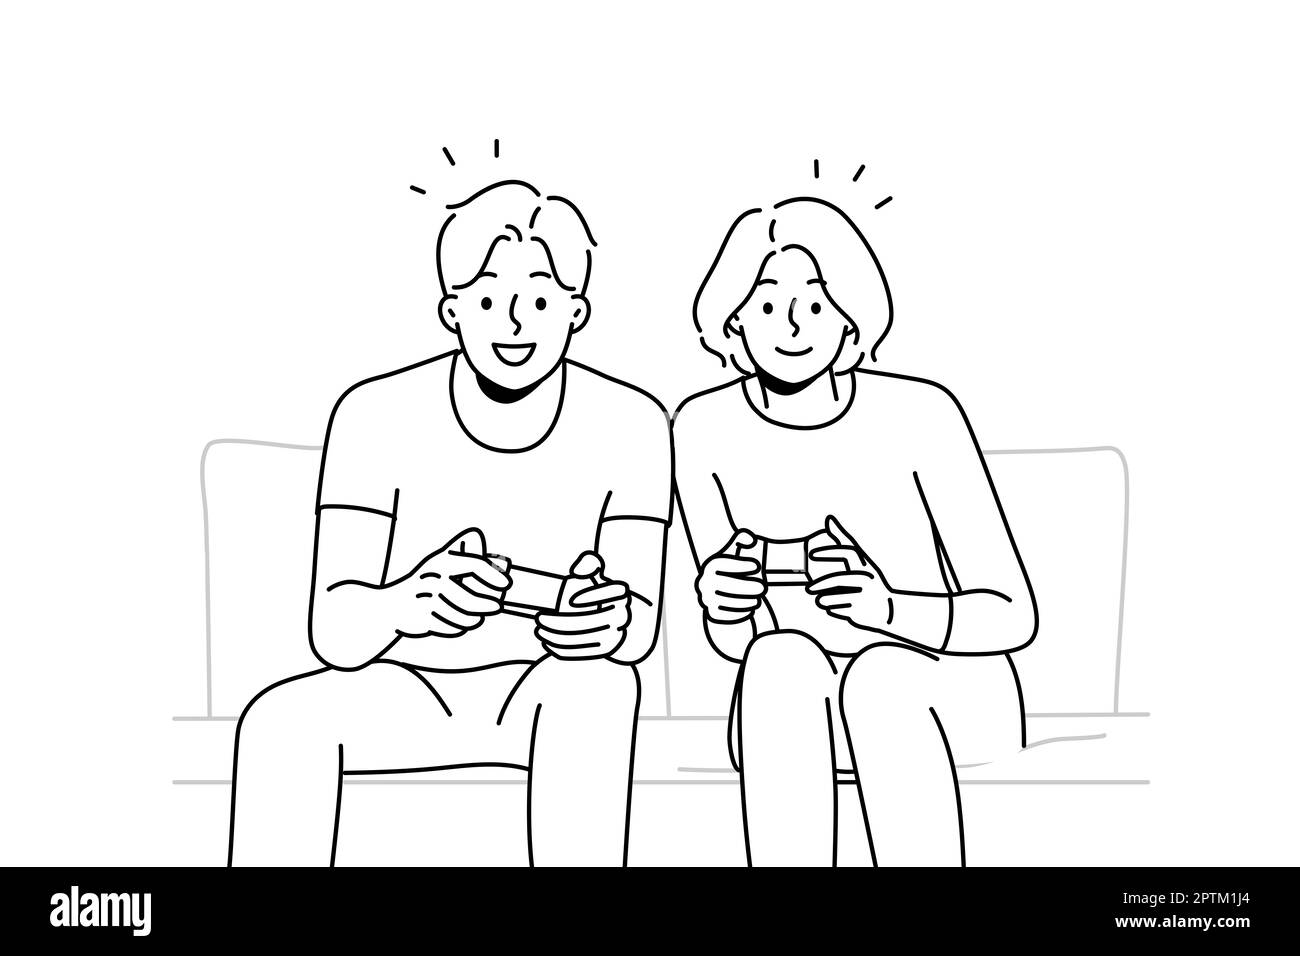 Hand-drawn vector sketch of a generic contemporary Video Game